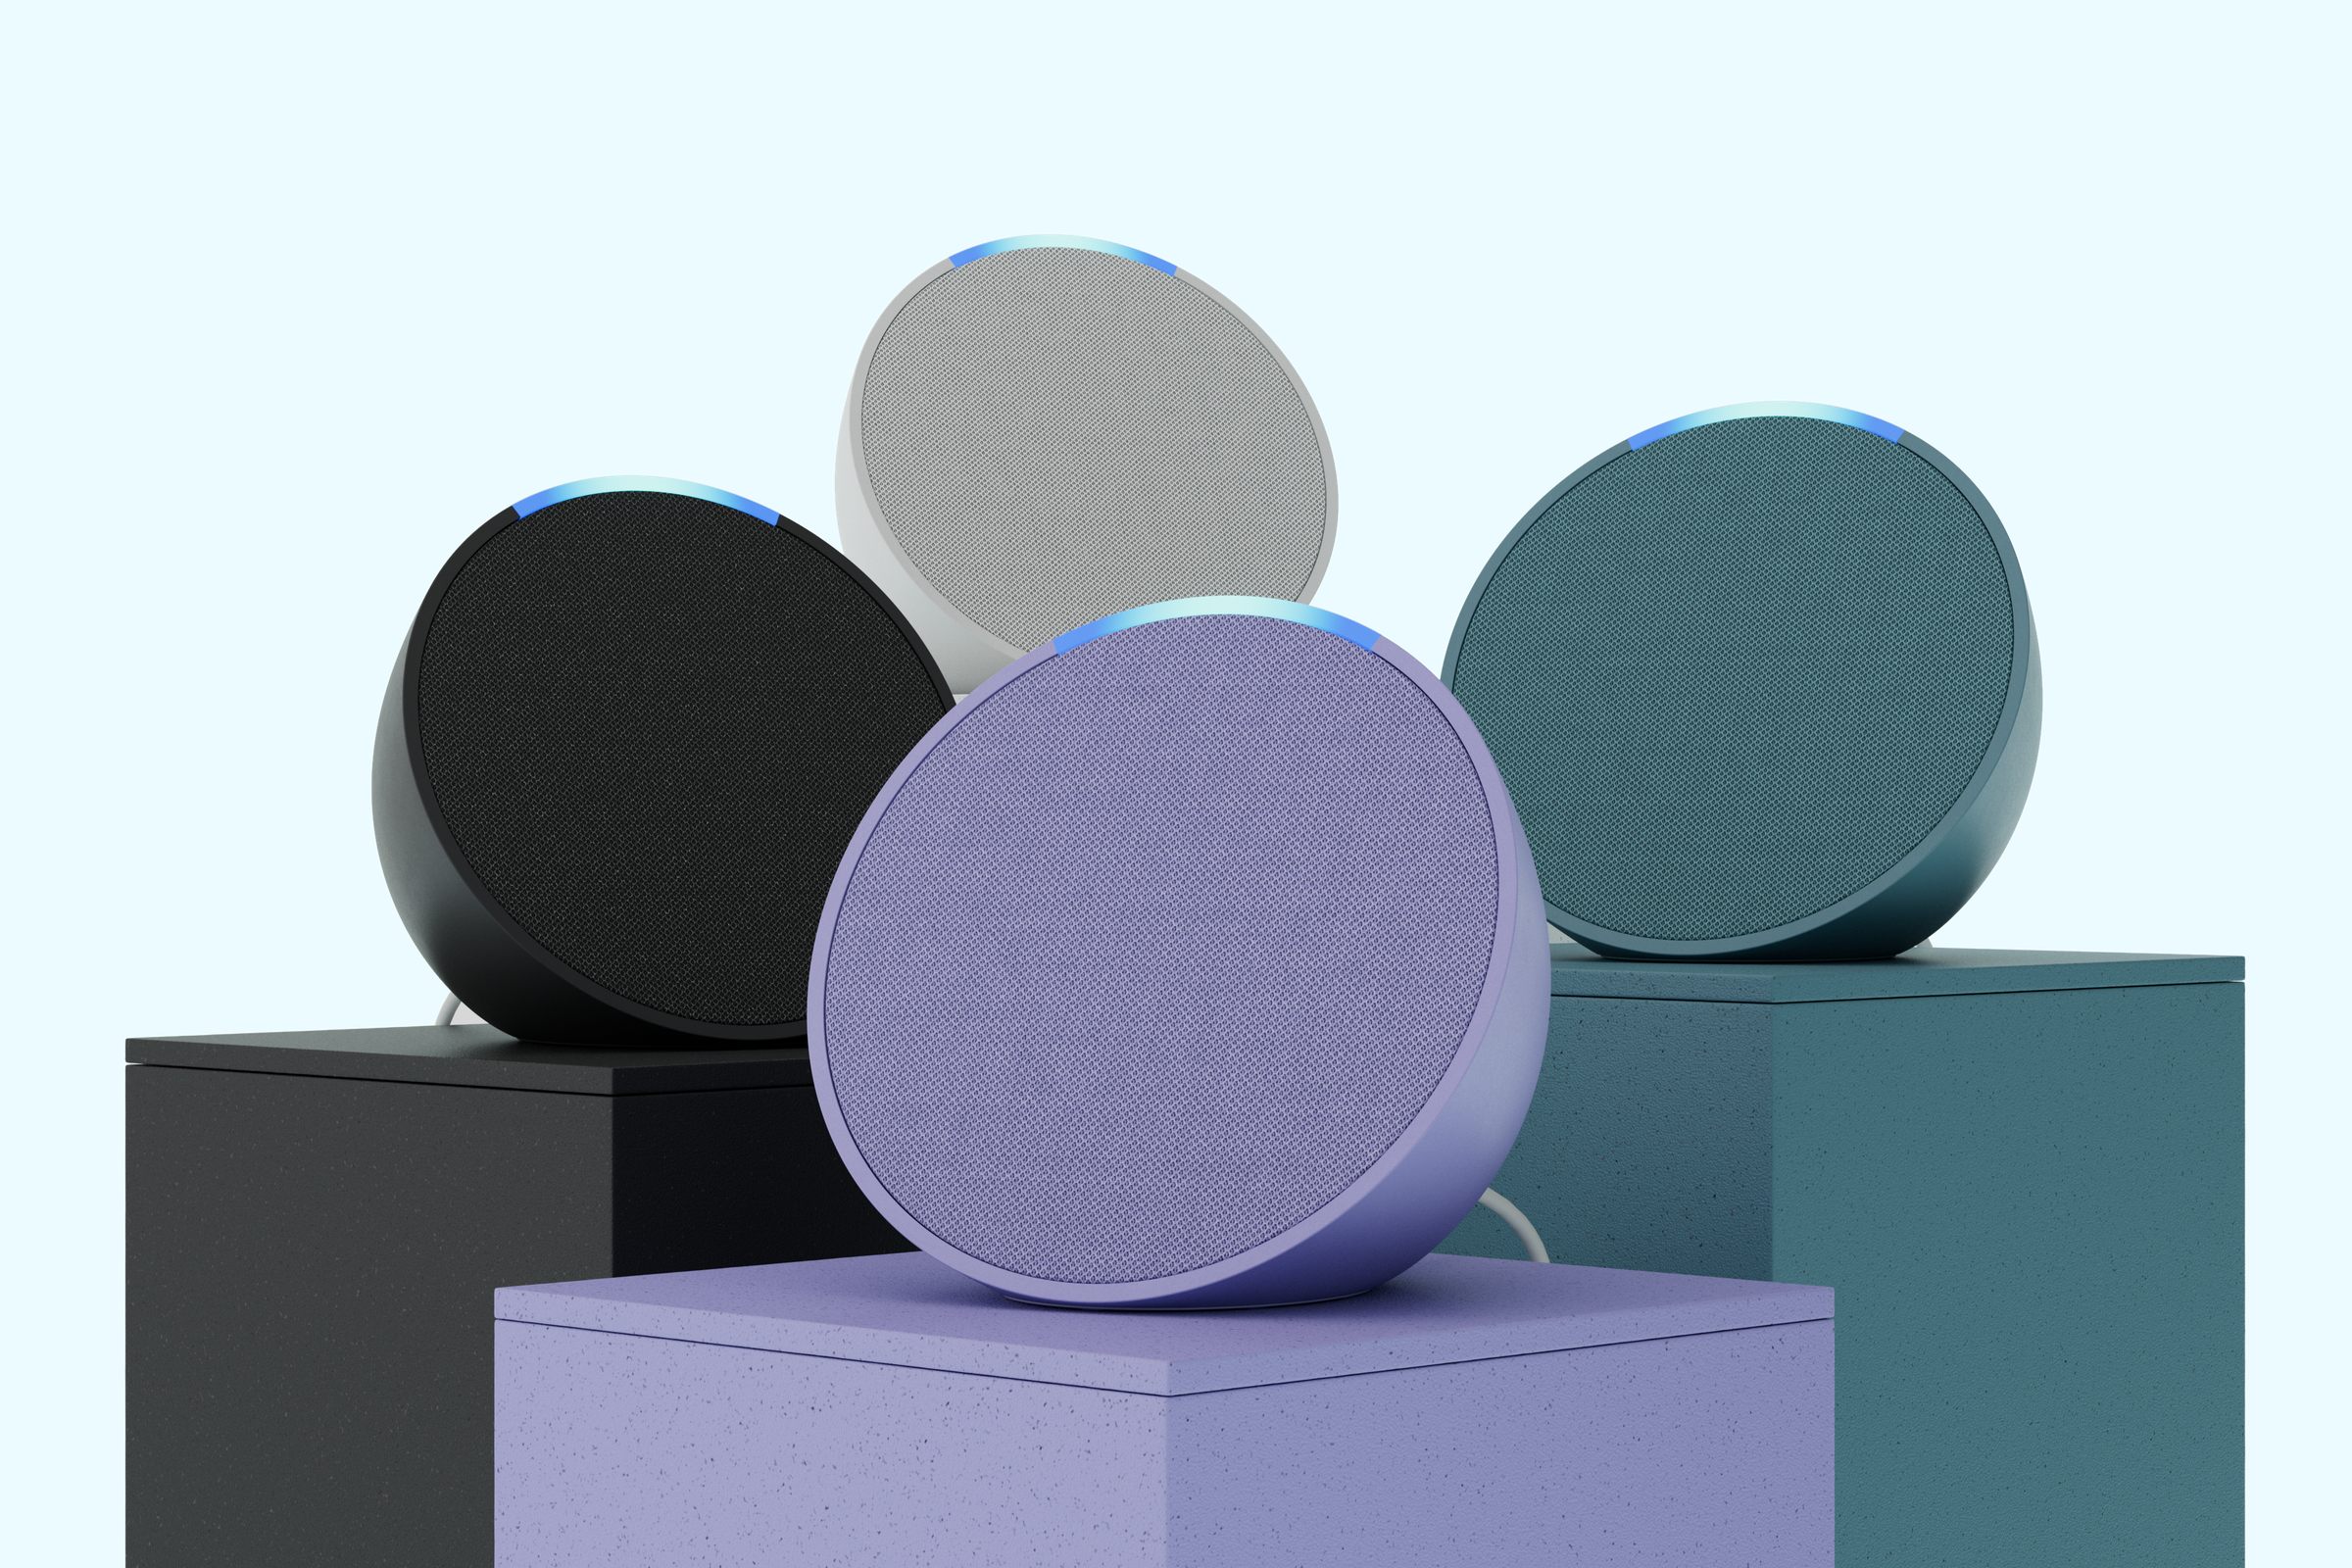 Four Echo Pop smart speakers in purple, green, black and white on matching colored stands.